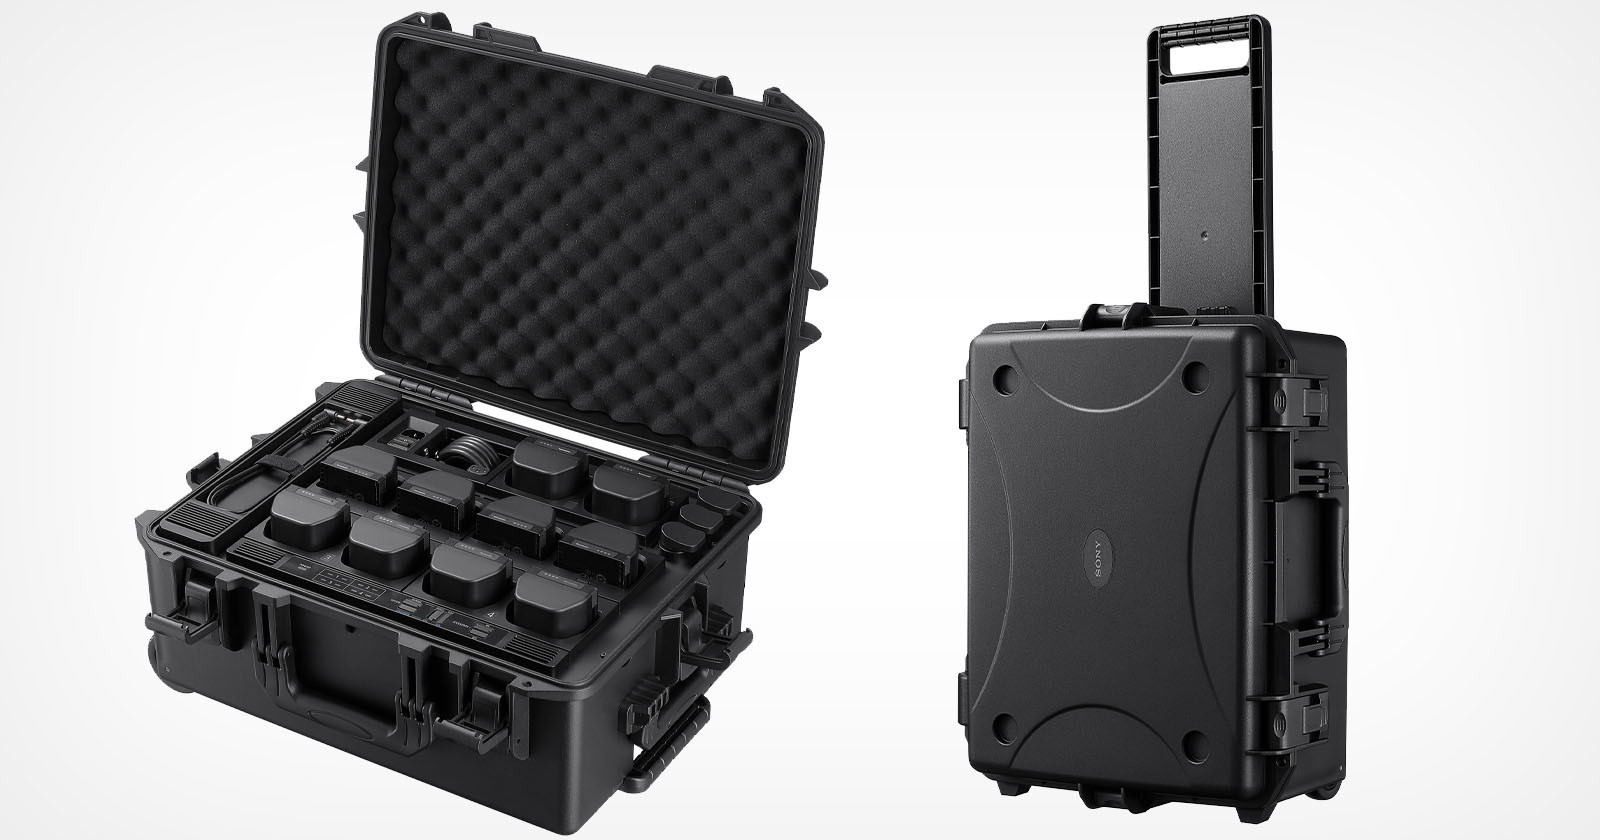 Sonys New Battery Station Holds and Charges 10 AirPeak Drone Batteries